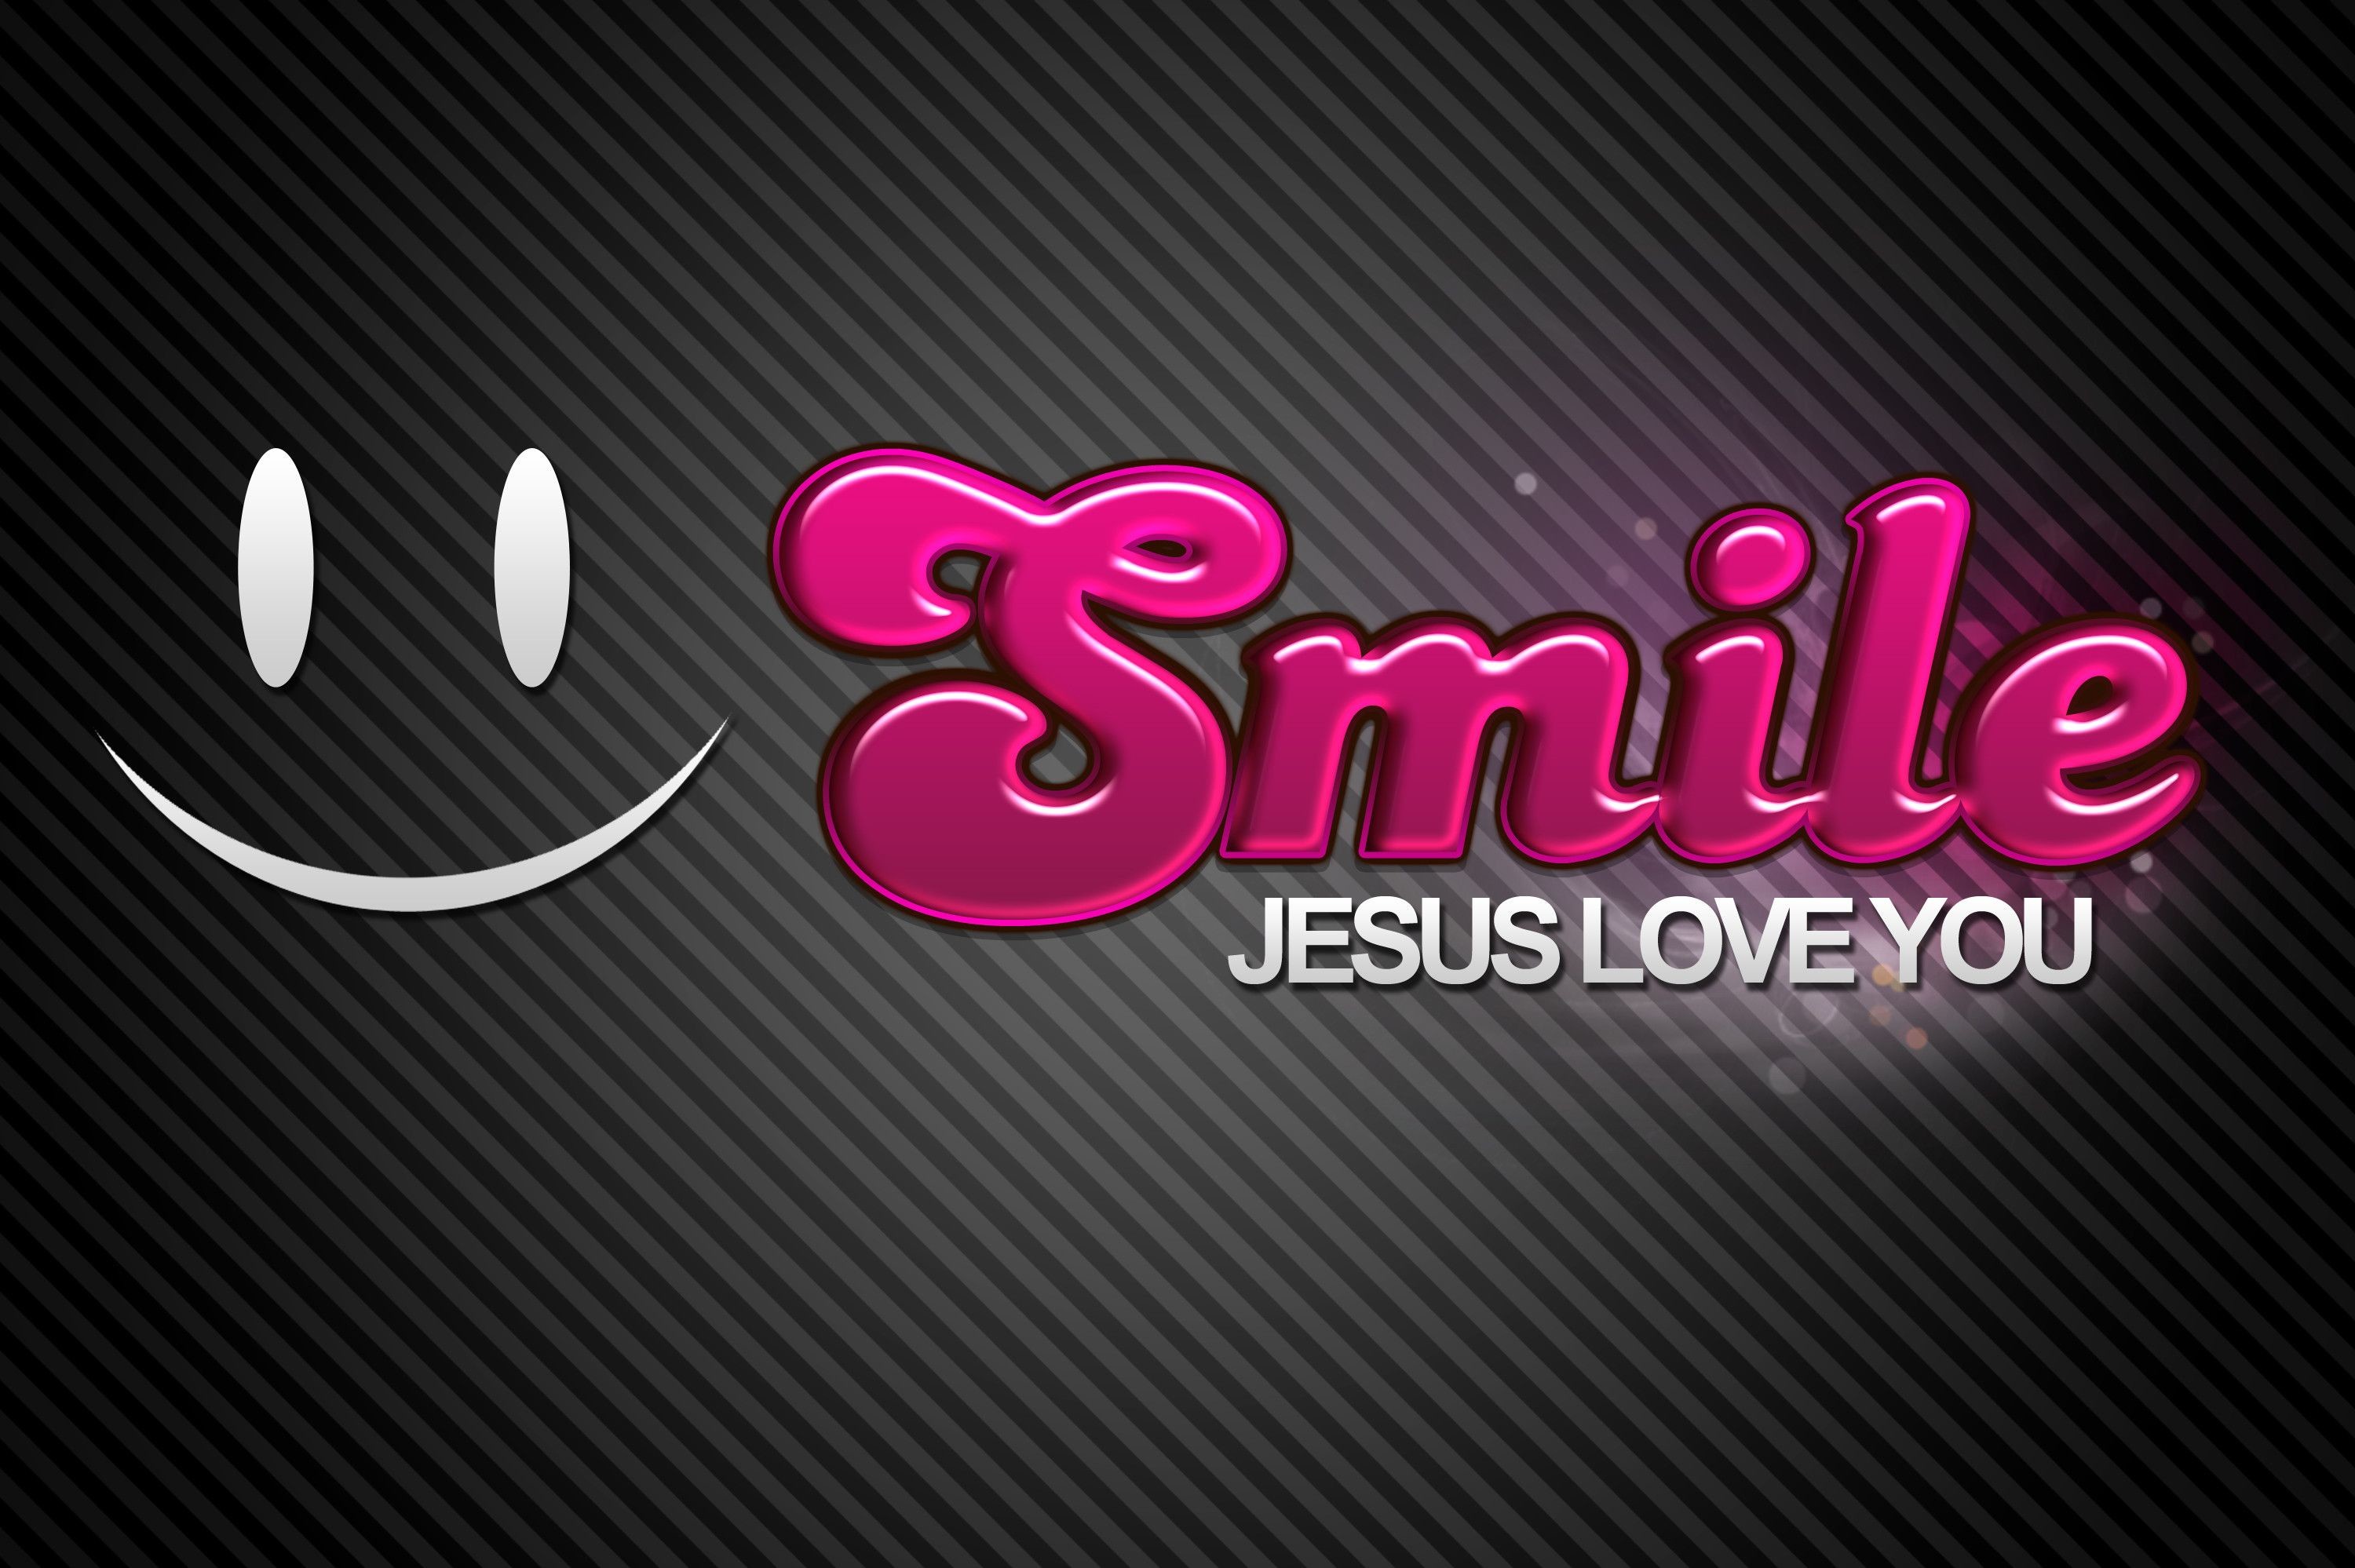 Jesus Loves Me Android Apps on Google Play